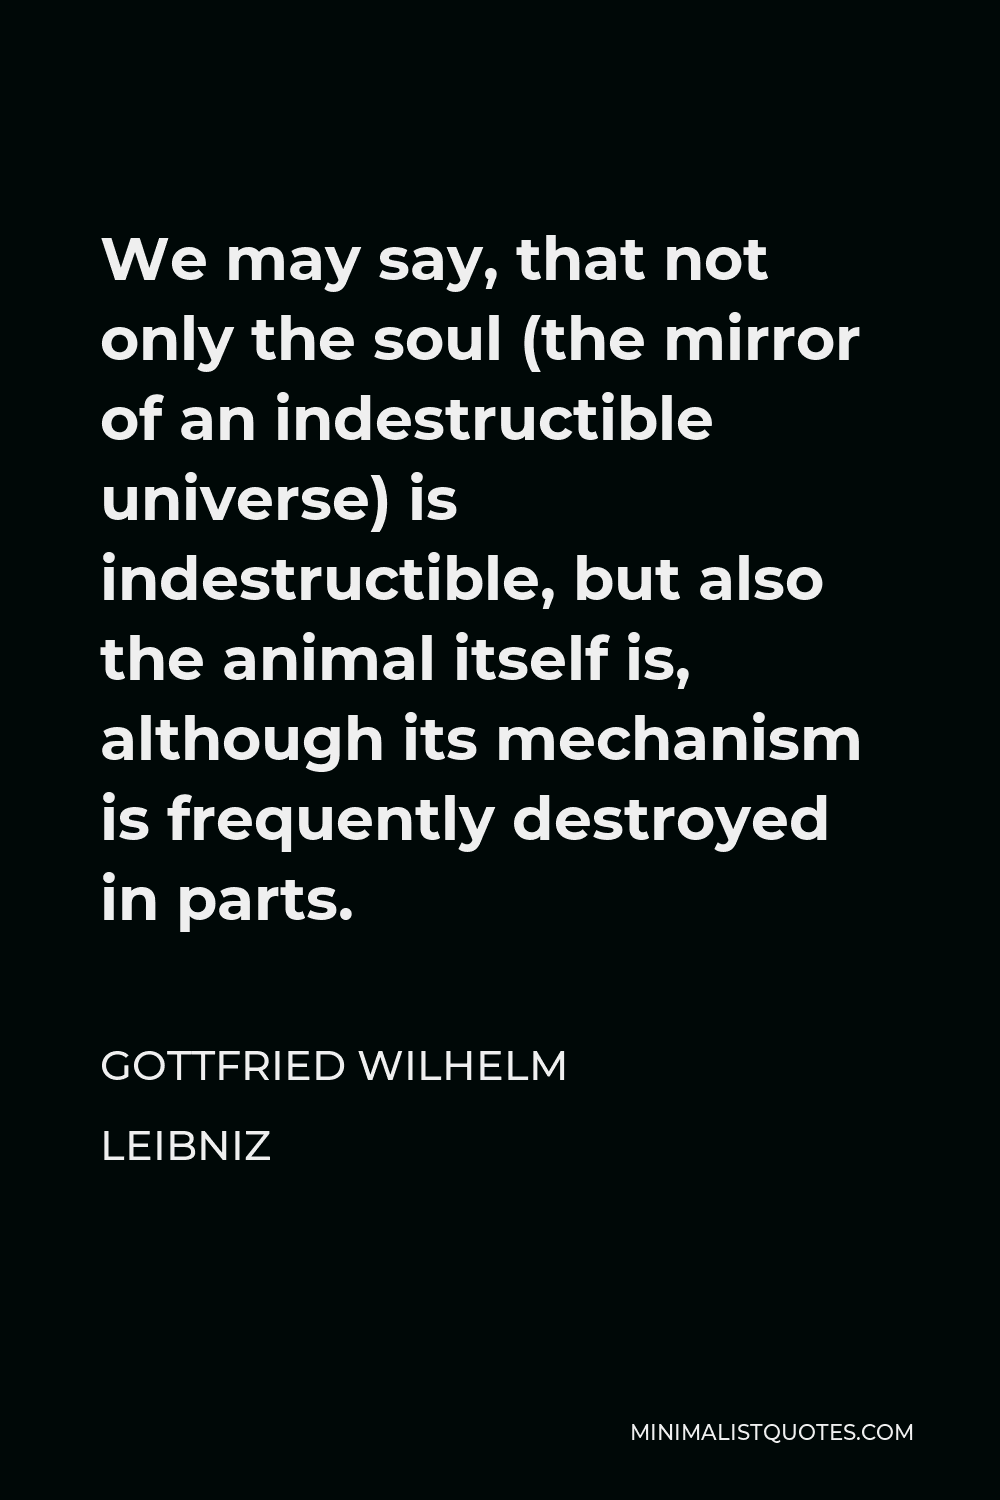 Gottfried Wilhelm Leibniz Quote - We may say, that not only the soul (the mirror of an indestructible universe) is indestructible, but also the animal itself is, although its mechanism is frequently destroyed in parts.